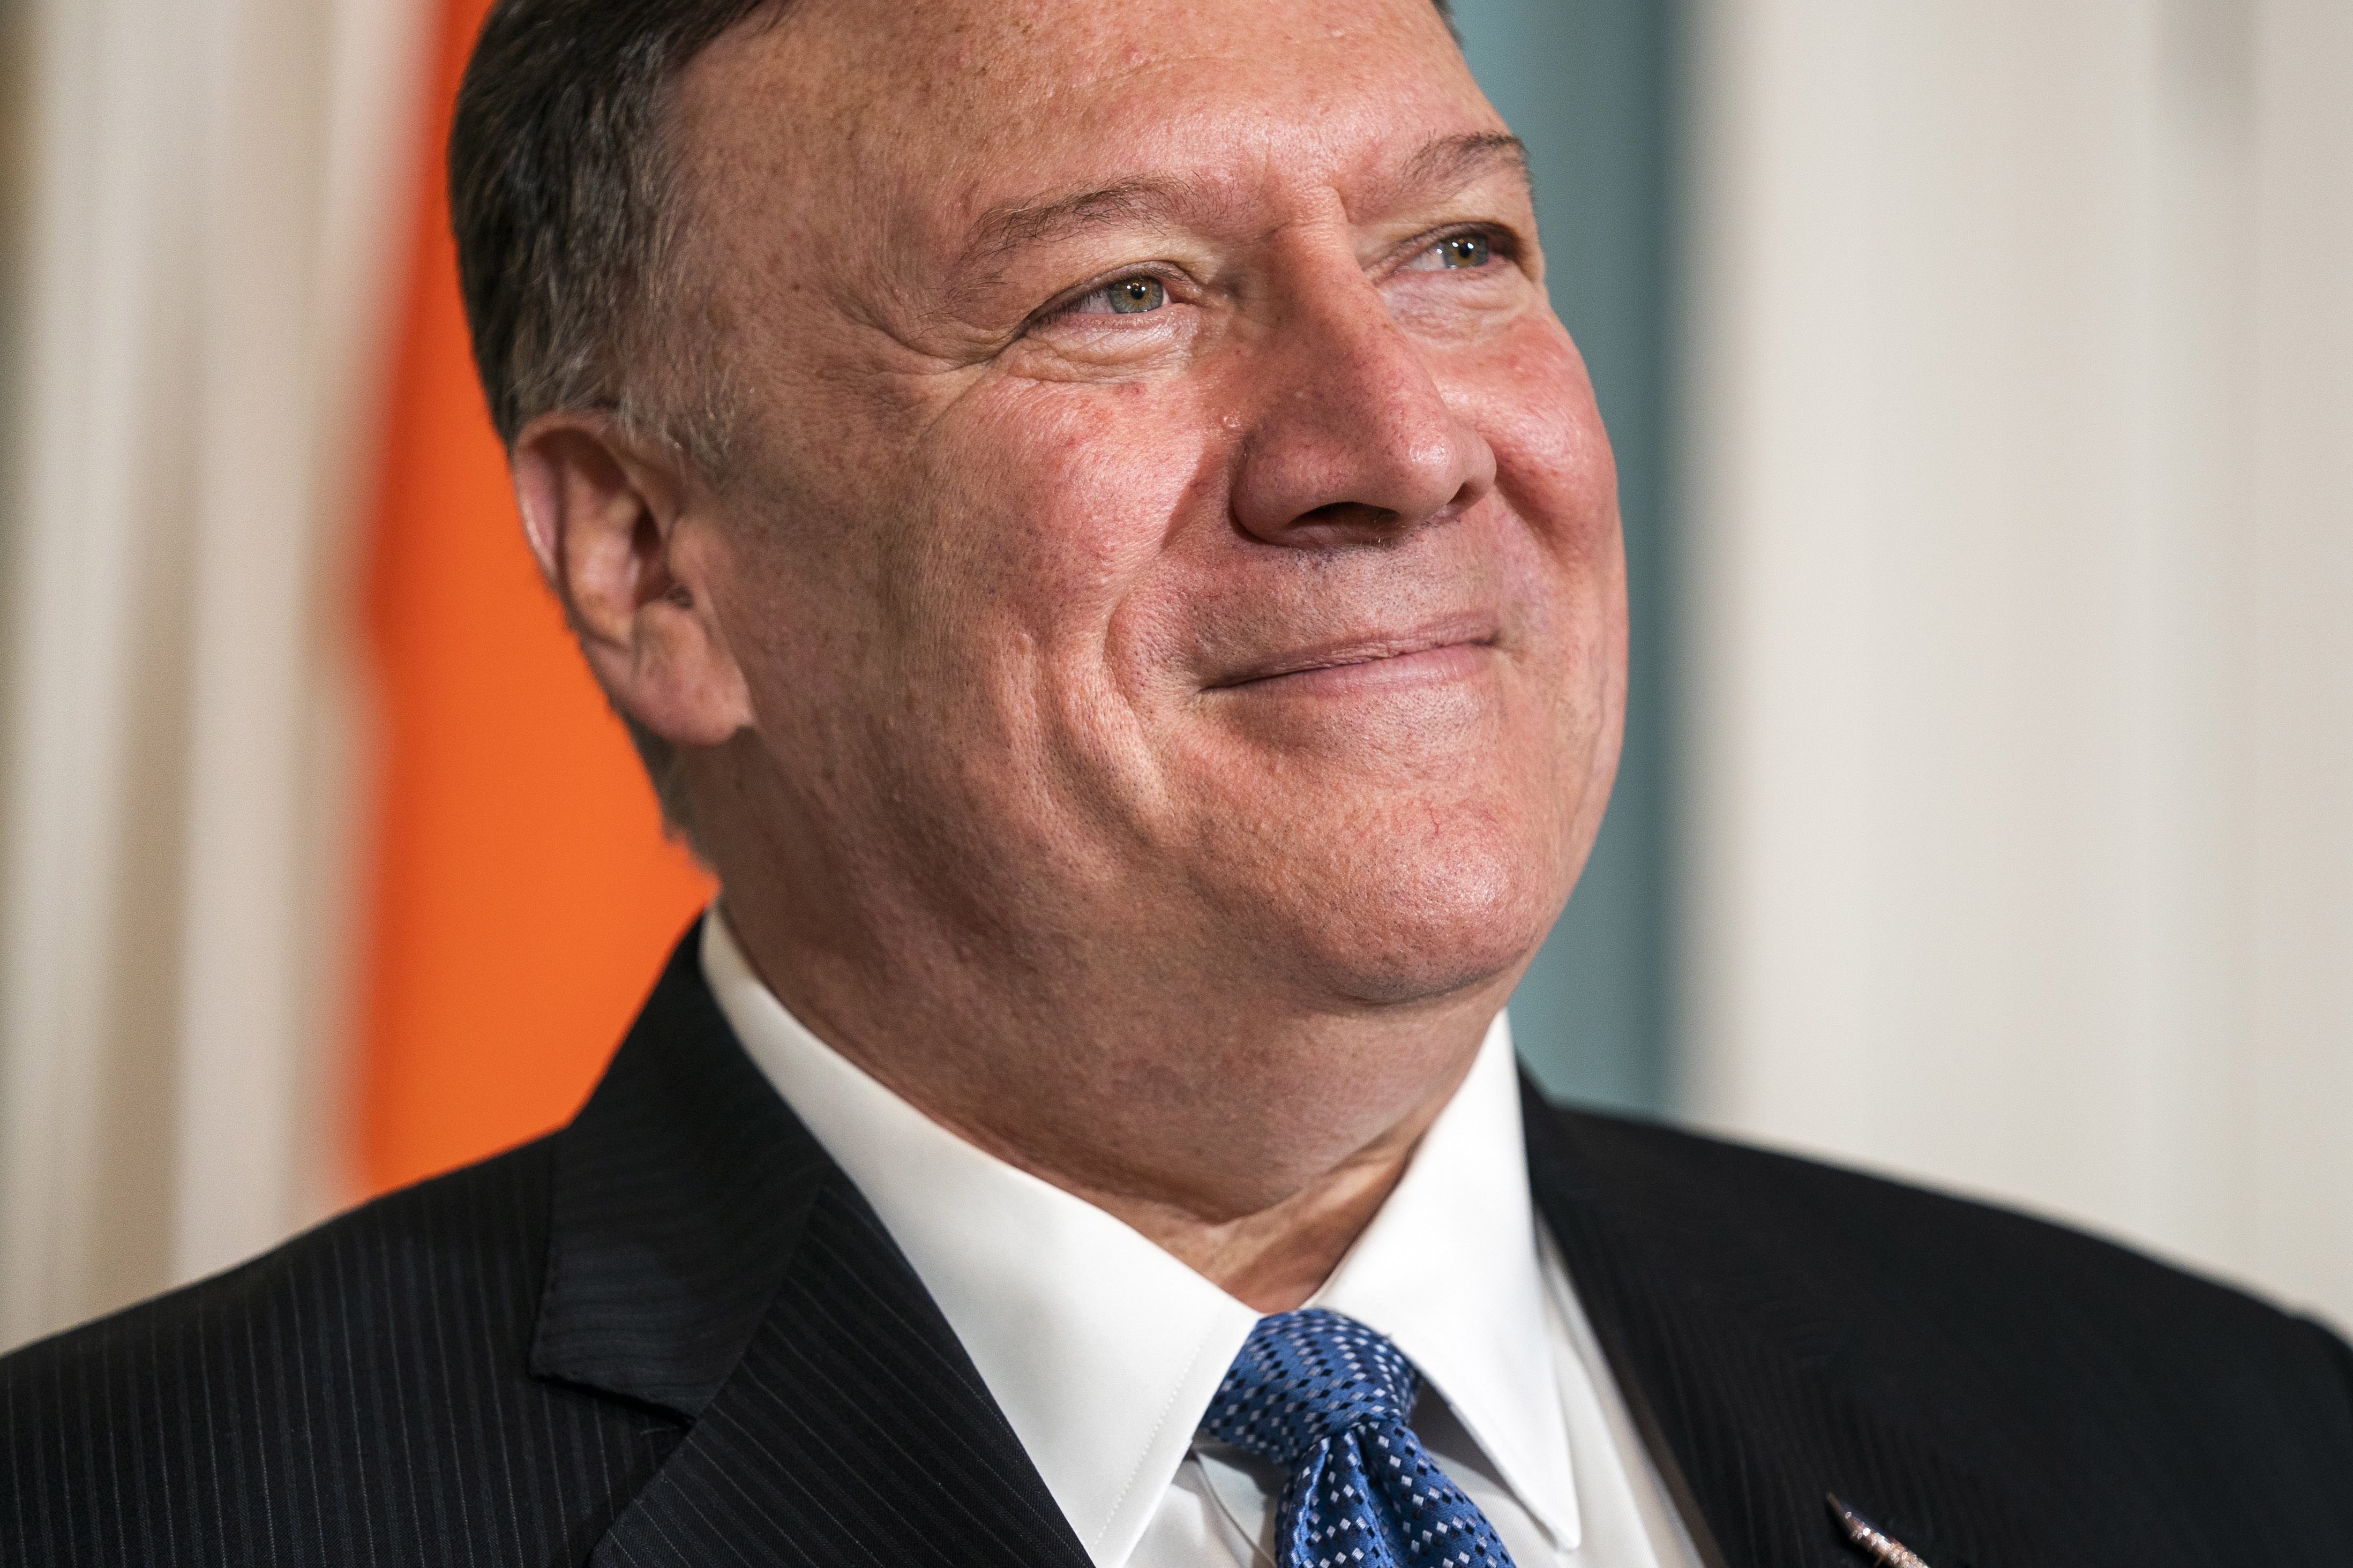 epa07883364 US Secretary of State Mike Pompeo smiles during a photo-op with Indian External Affairs Minister (not pictured) in the State Department in Washington, DC, USA, 30 September 2019. Pompeo is facing increasing scrutiny from House lawmakers investigating the Trump whistleblower complaint. He ignored shouted questions about the issue.  EPA/JIM LO SCALZO